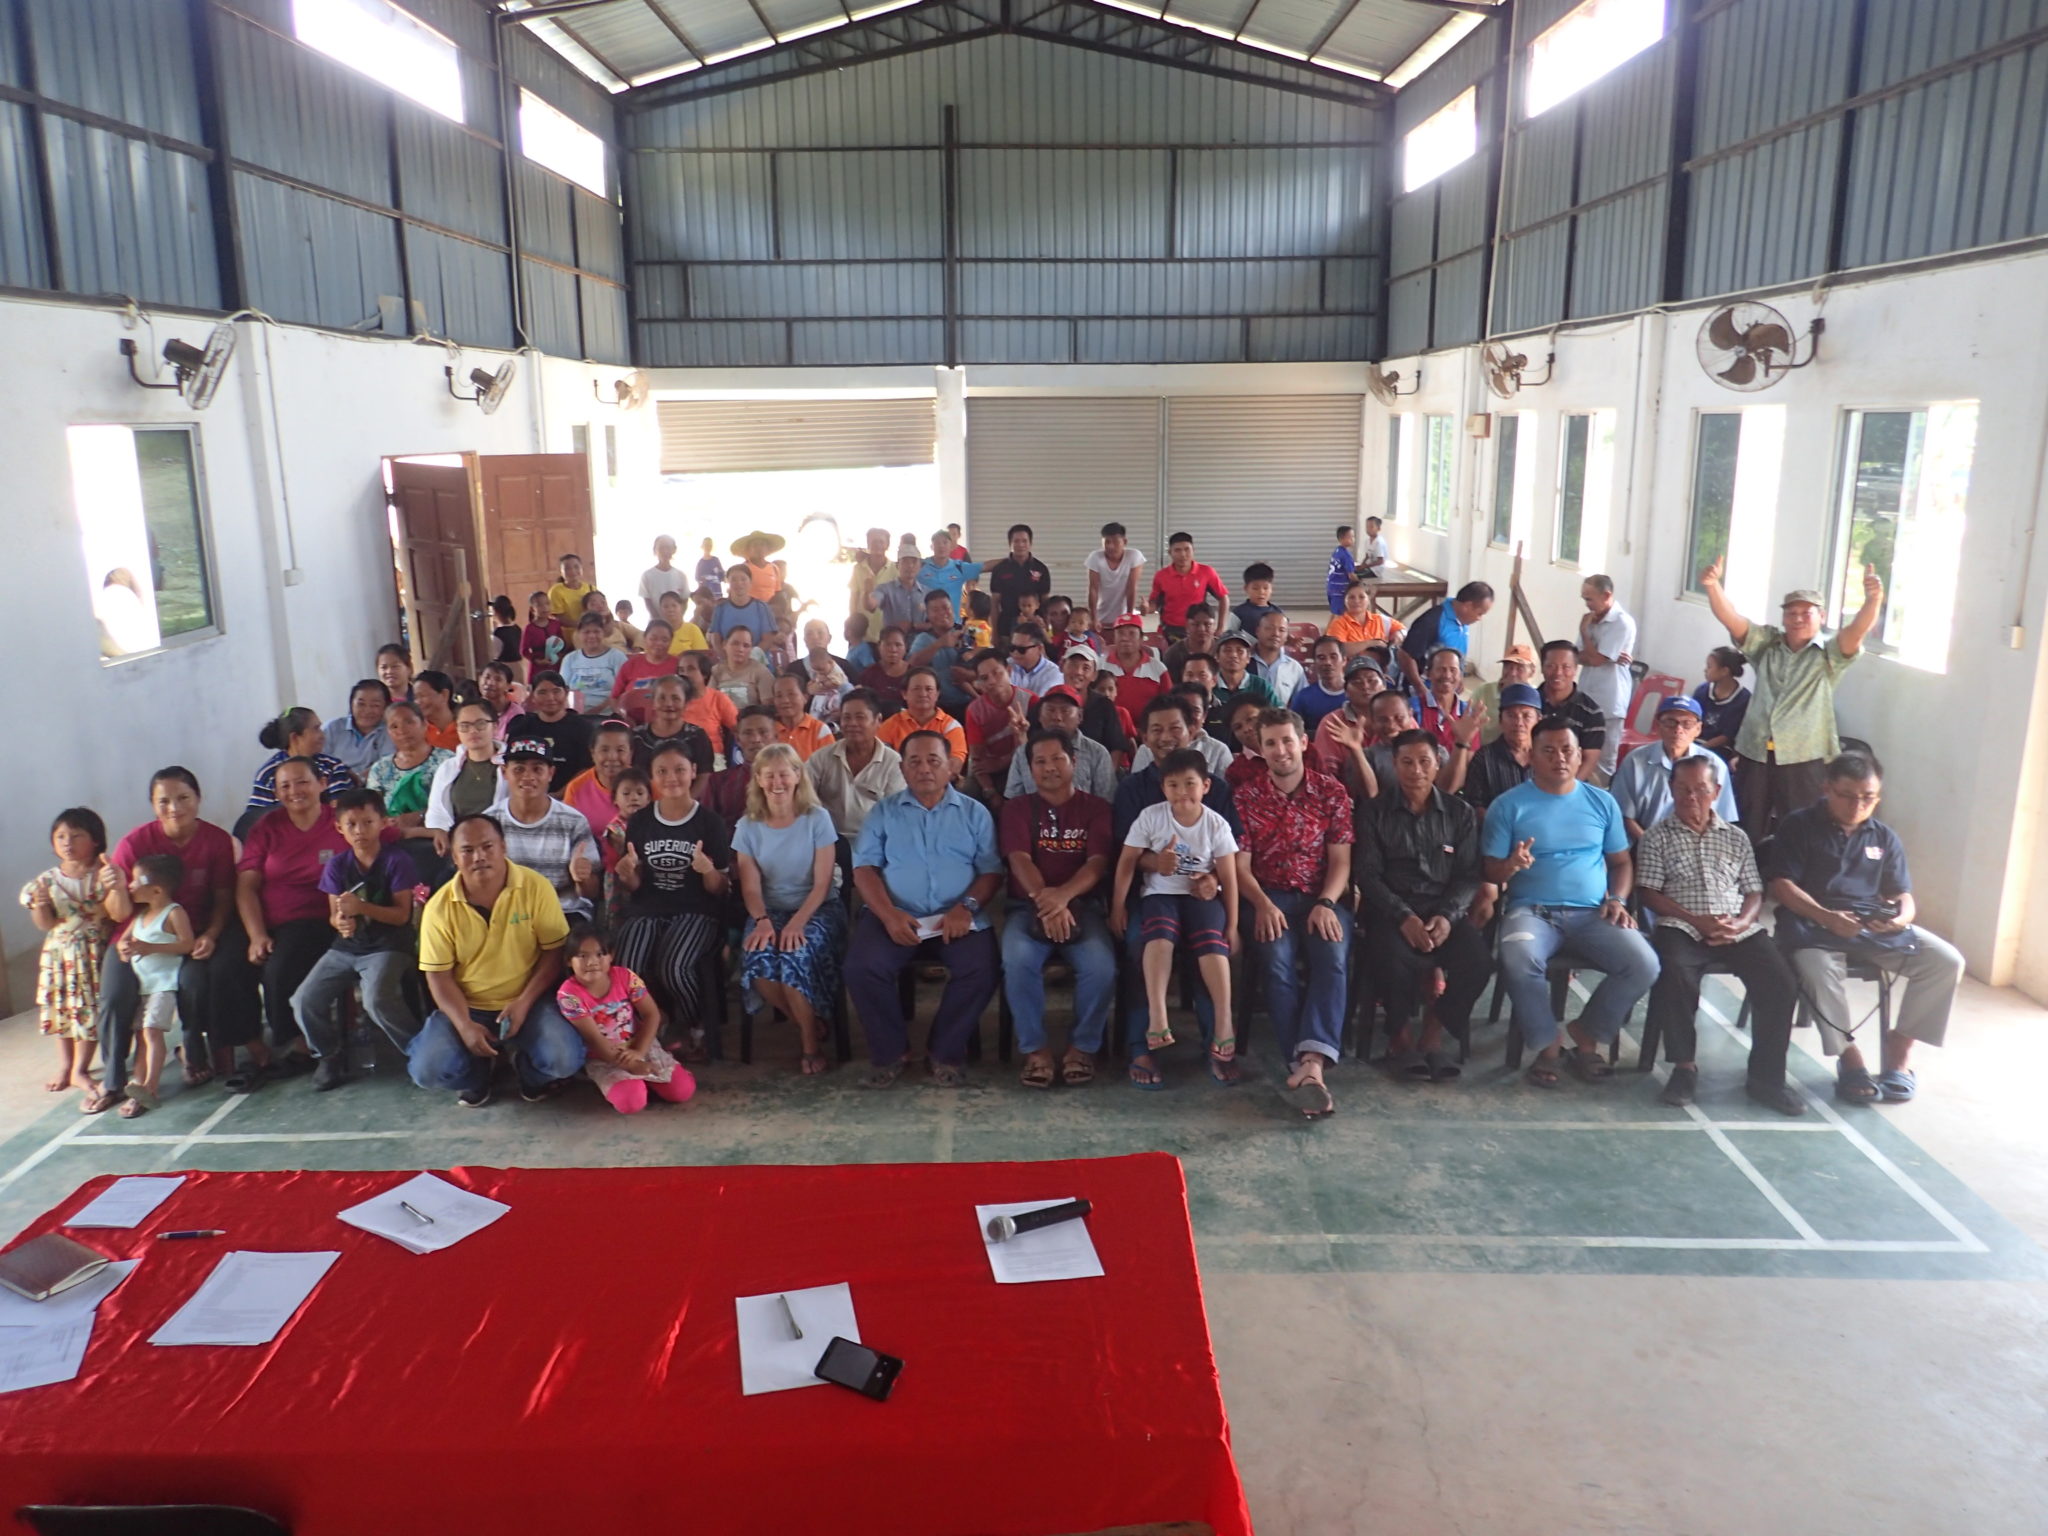 Villagers in Sabah, Malaysia gather to celebrate the launch of a forest protection and clean water project with Seacology